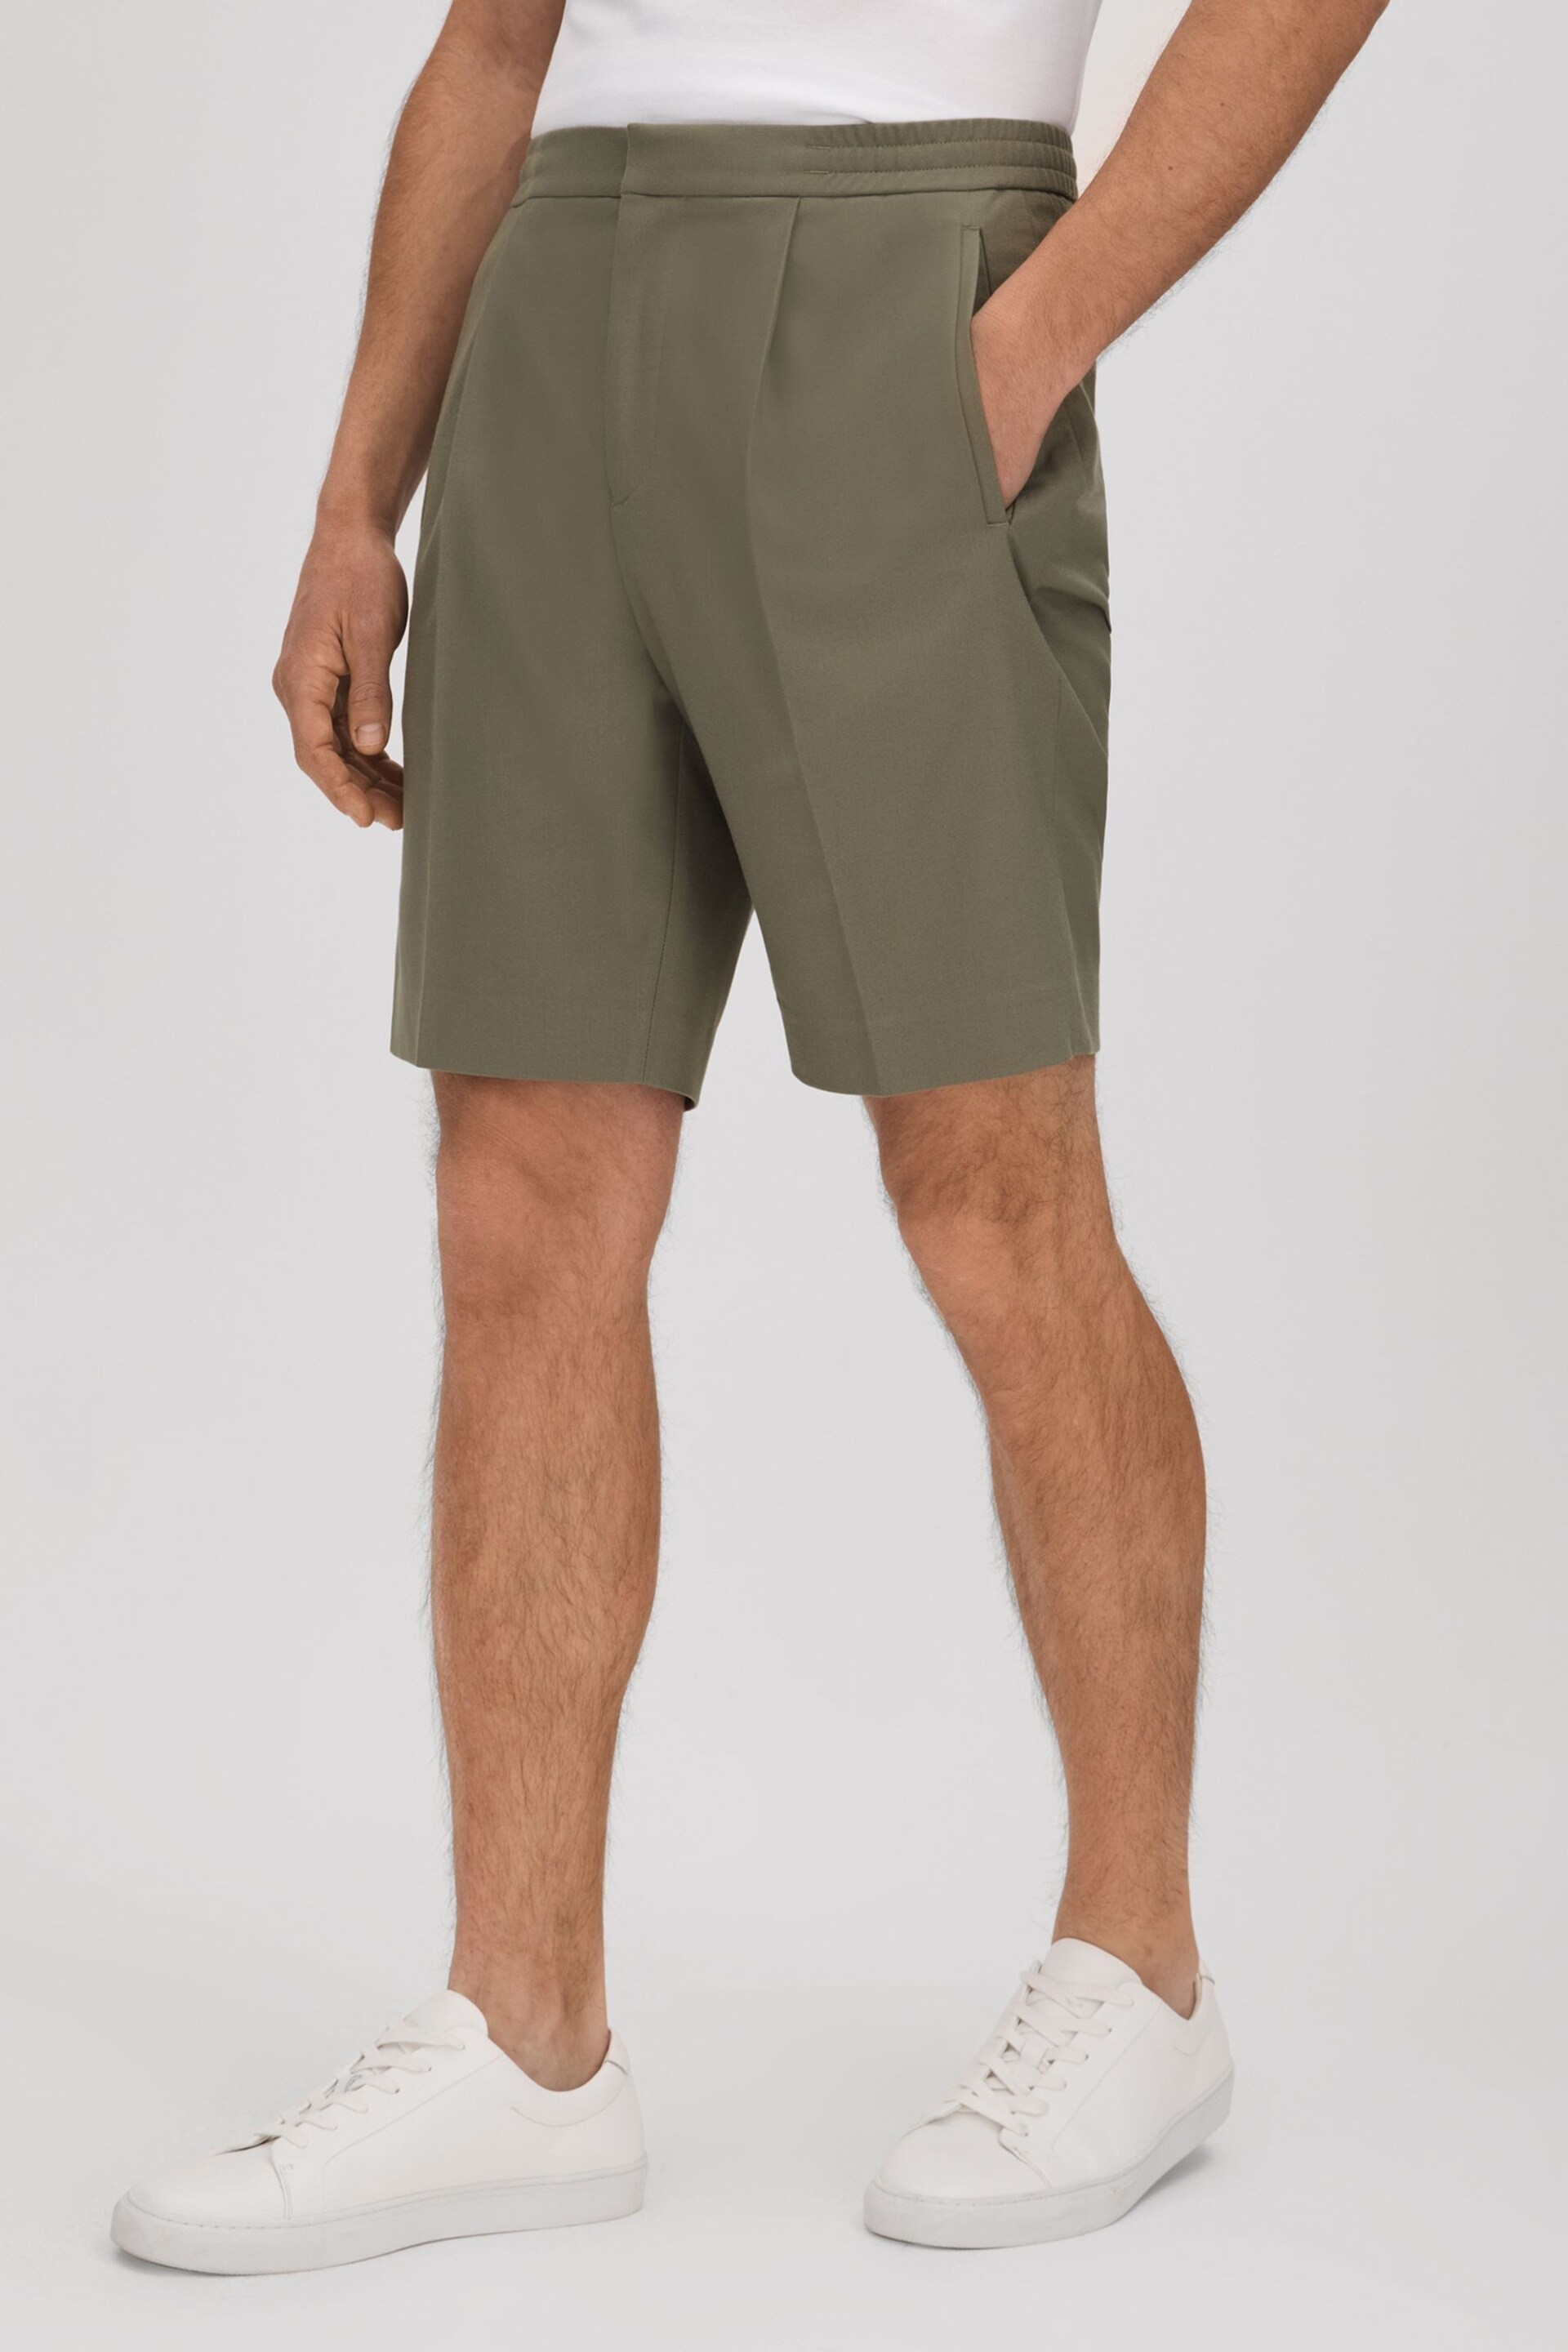 Reiss Sage Sussex Relaxed Drawstring Shorts - Image 1 of 6